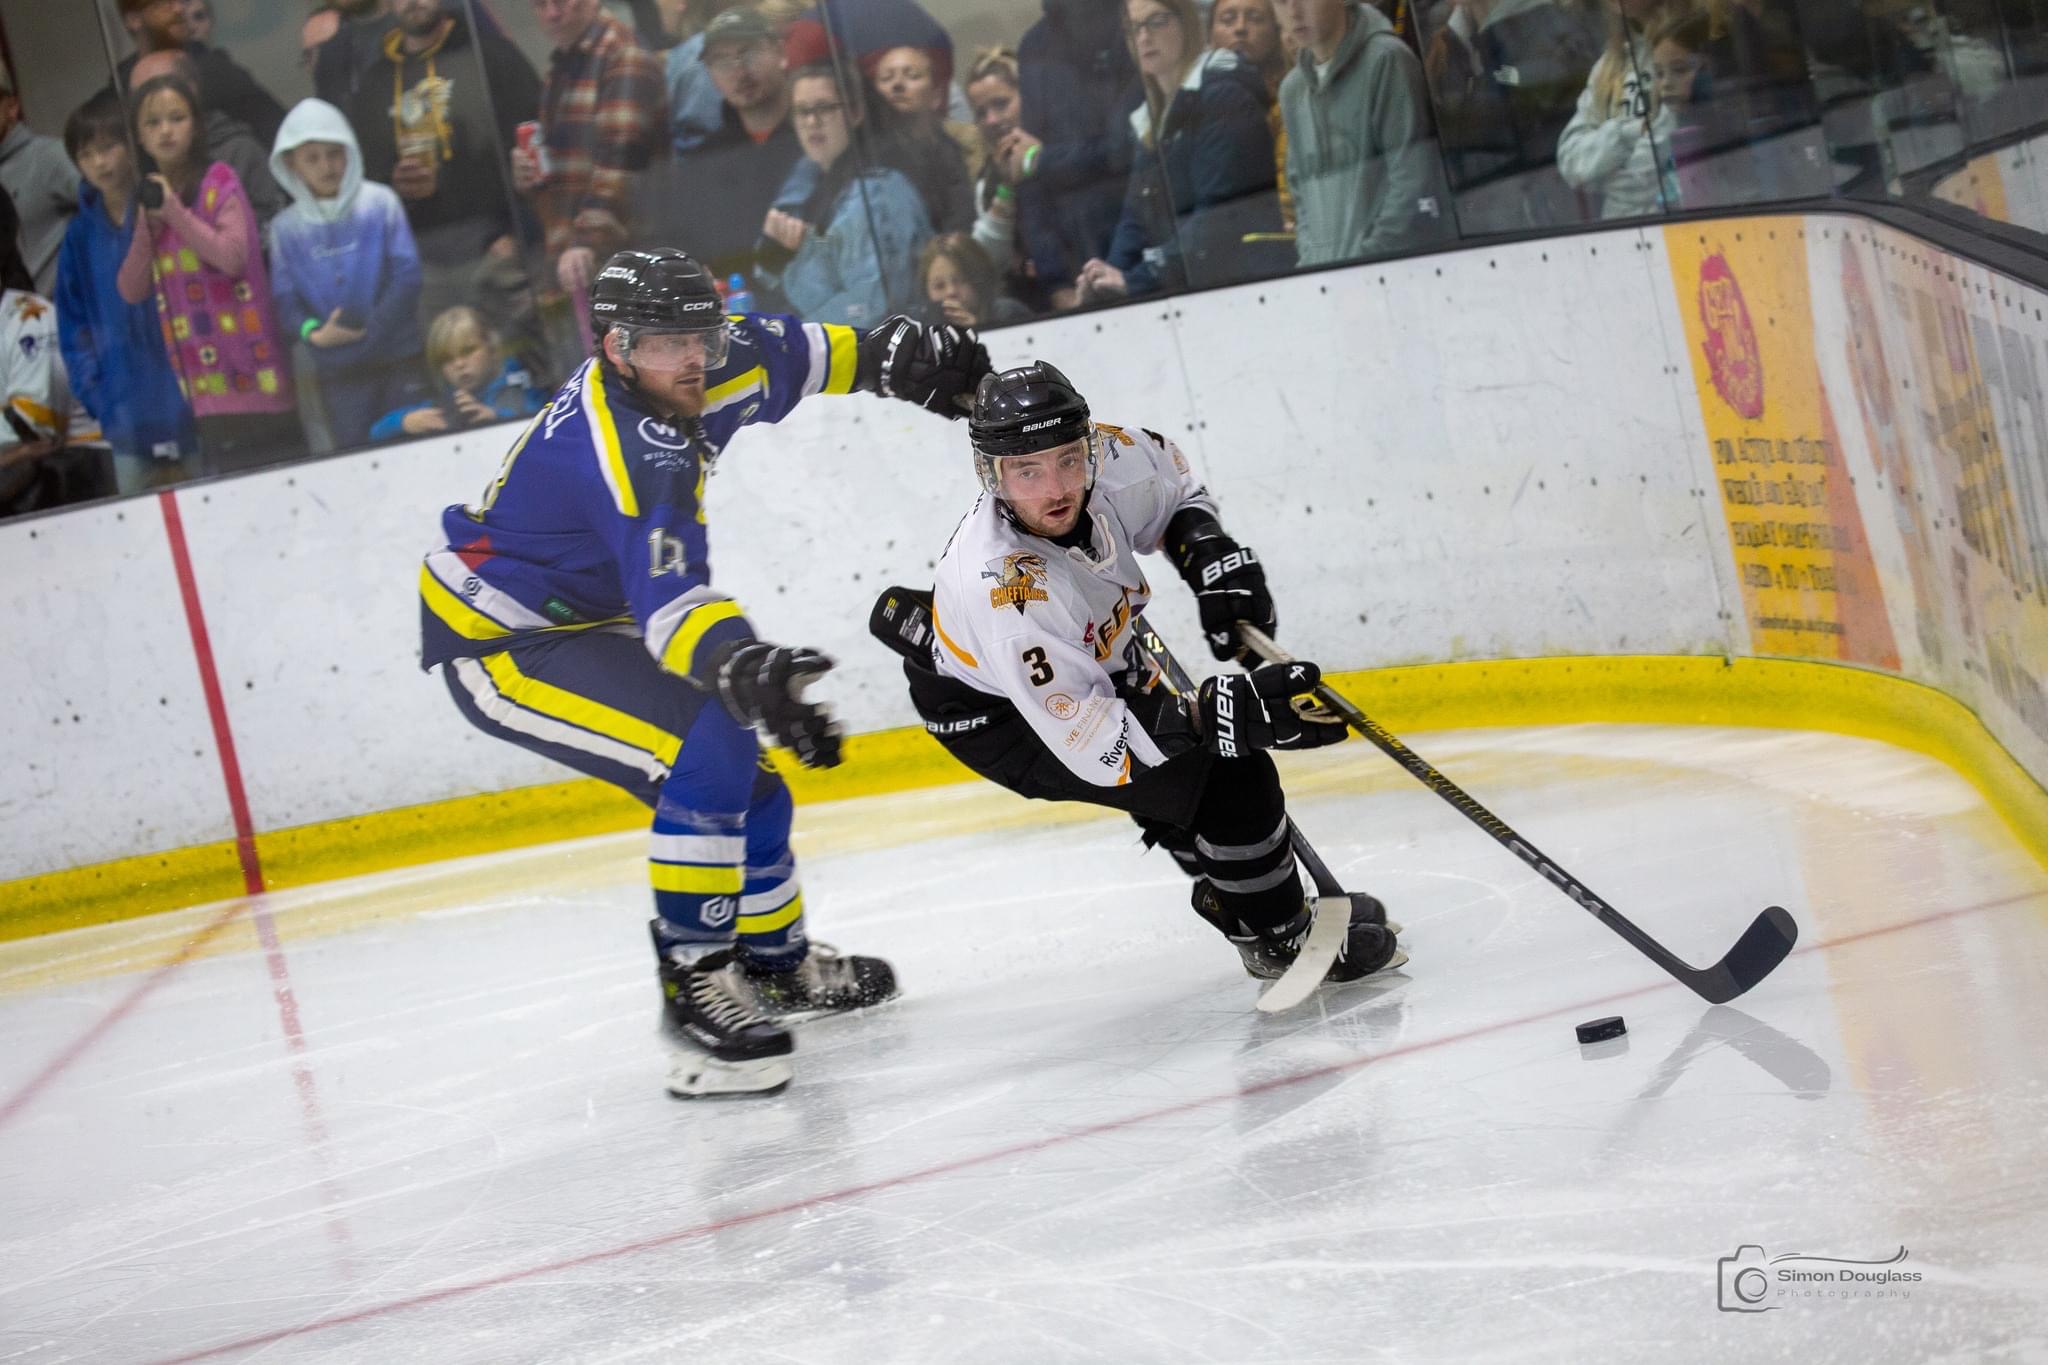 News Report - Chelmsford Chieftains